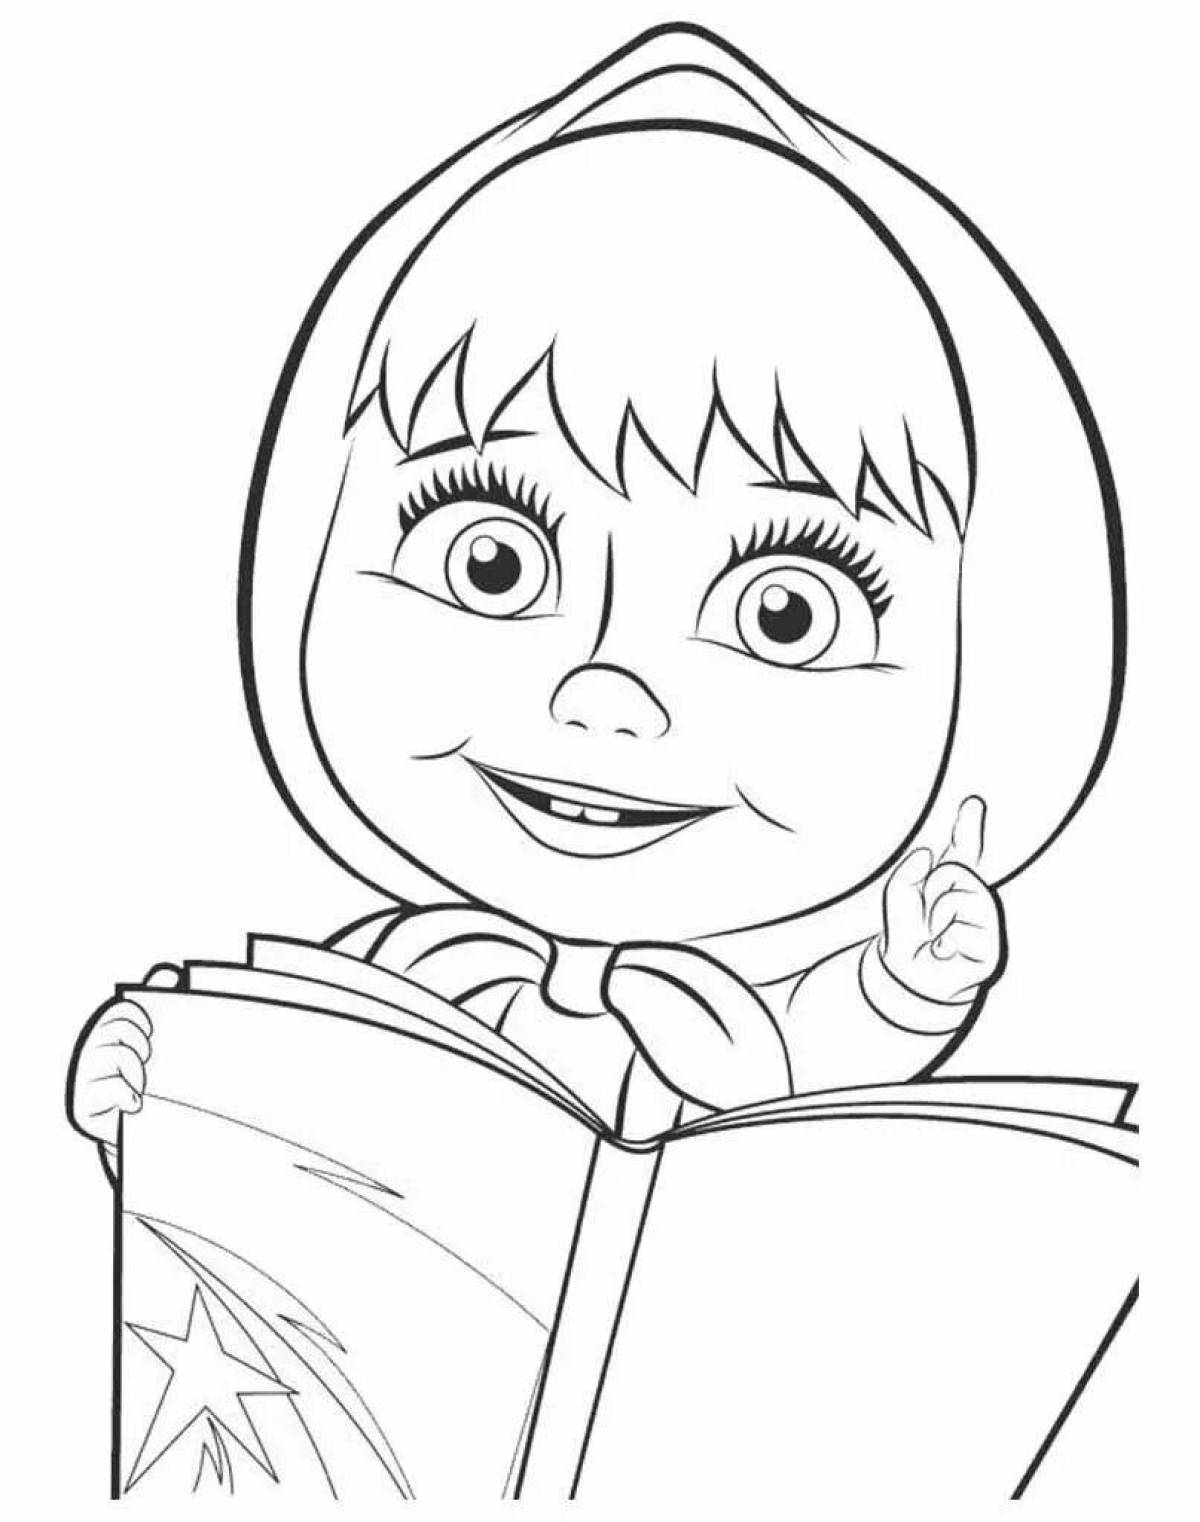 Delightful masha and the bear coloring book